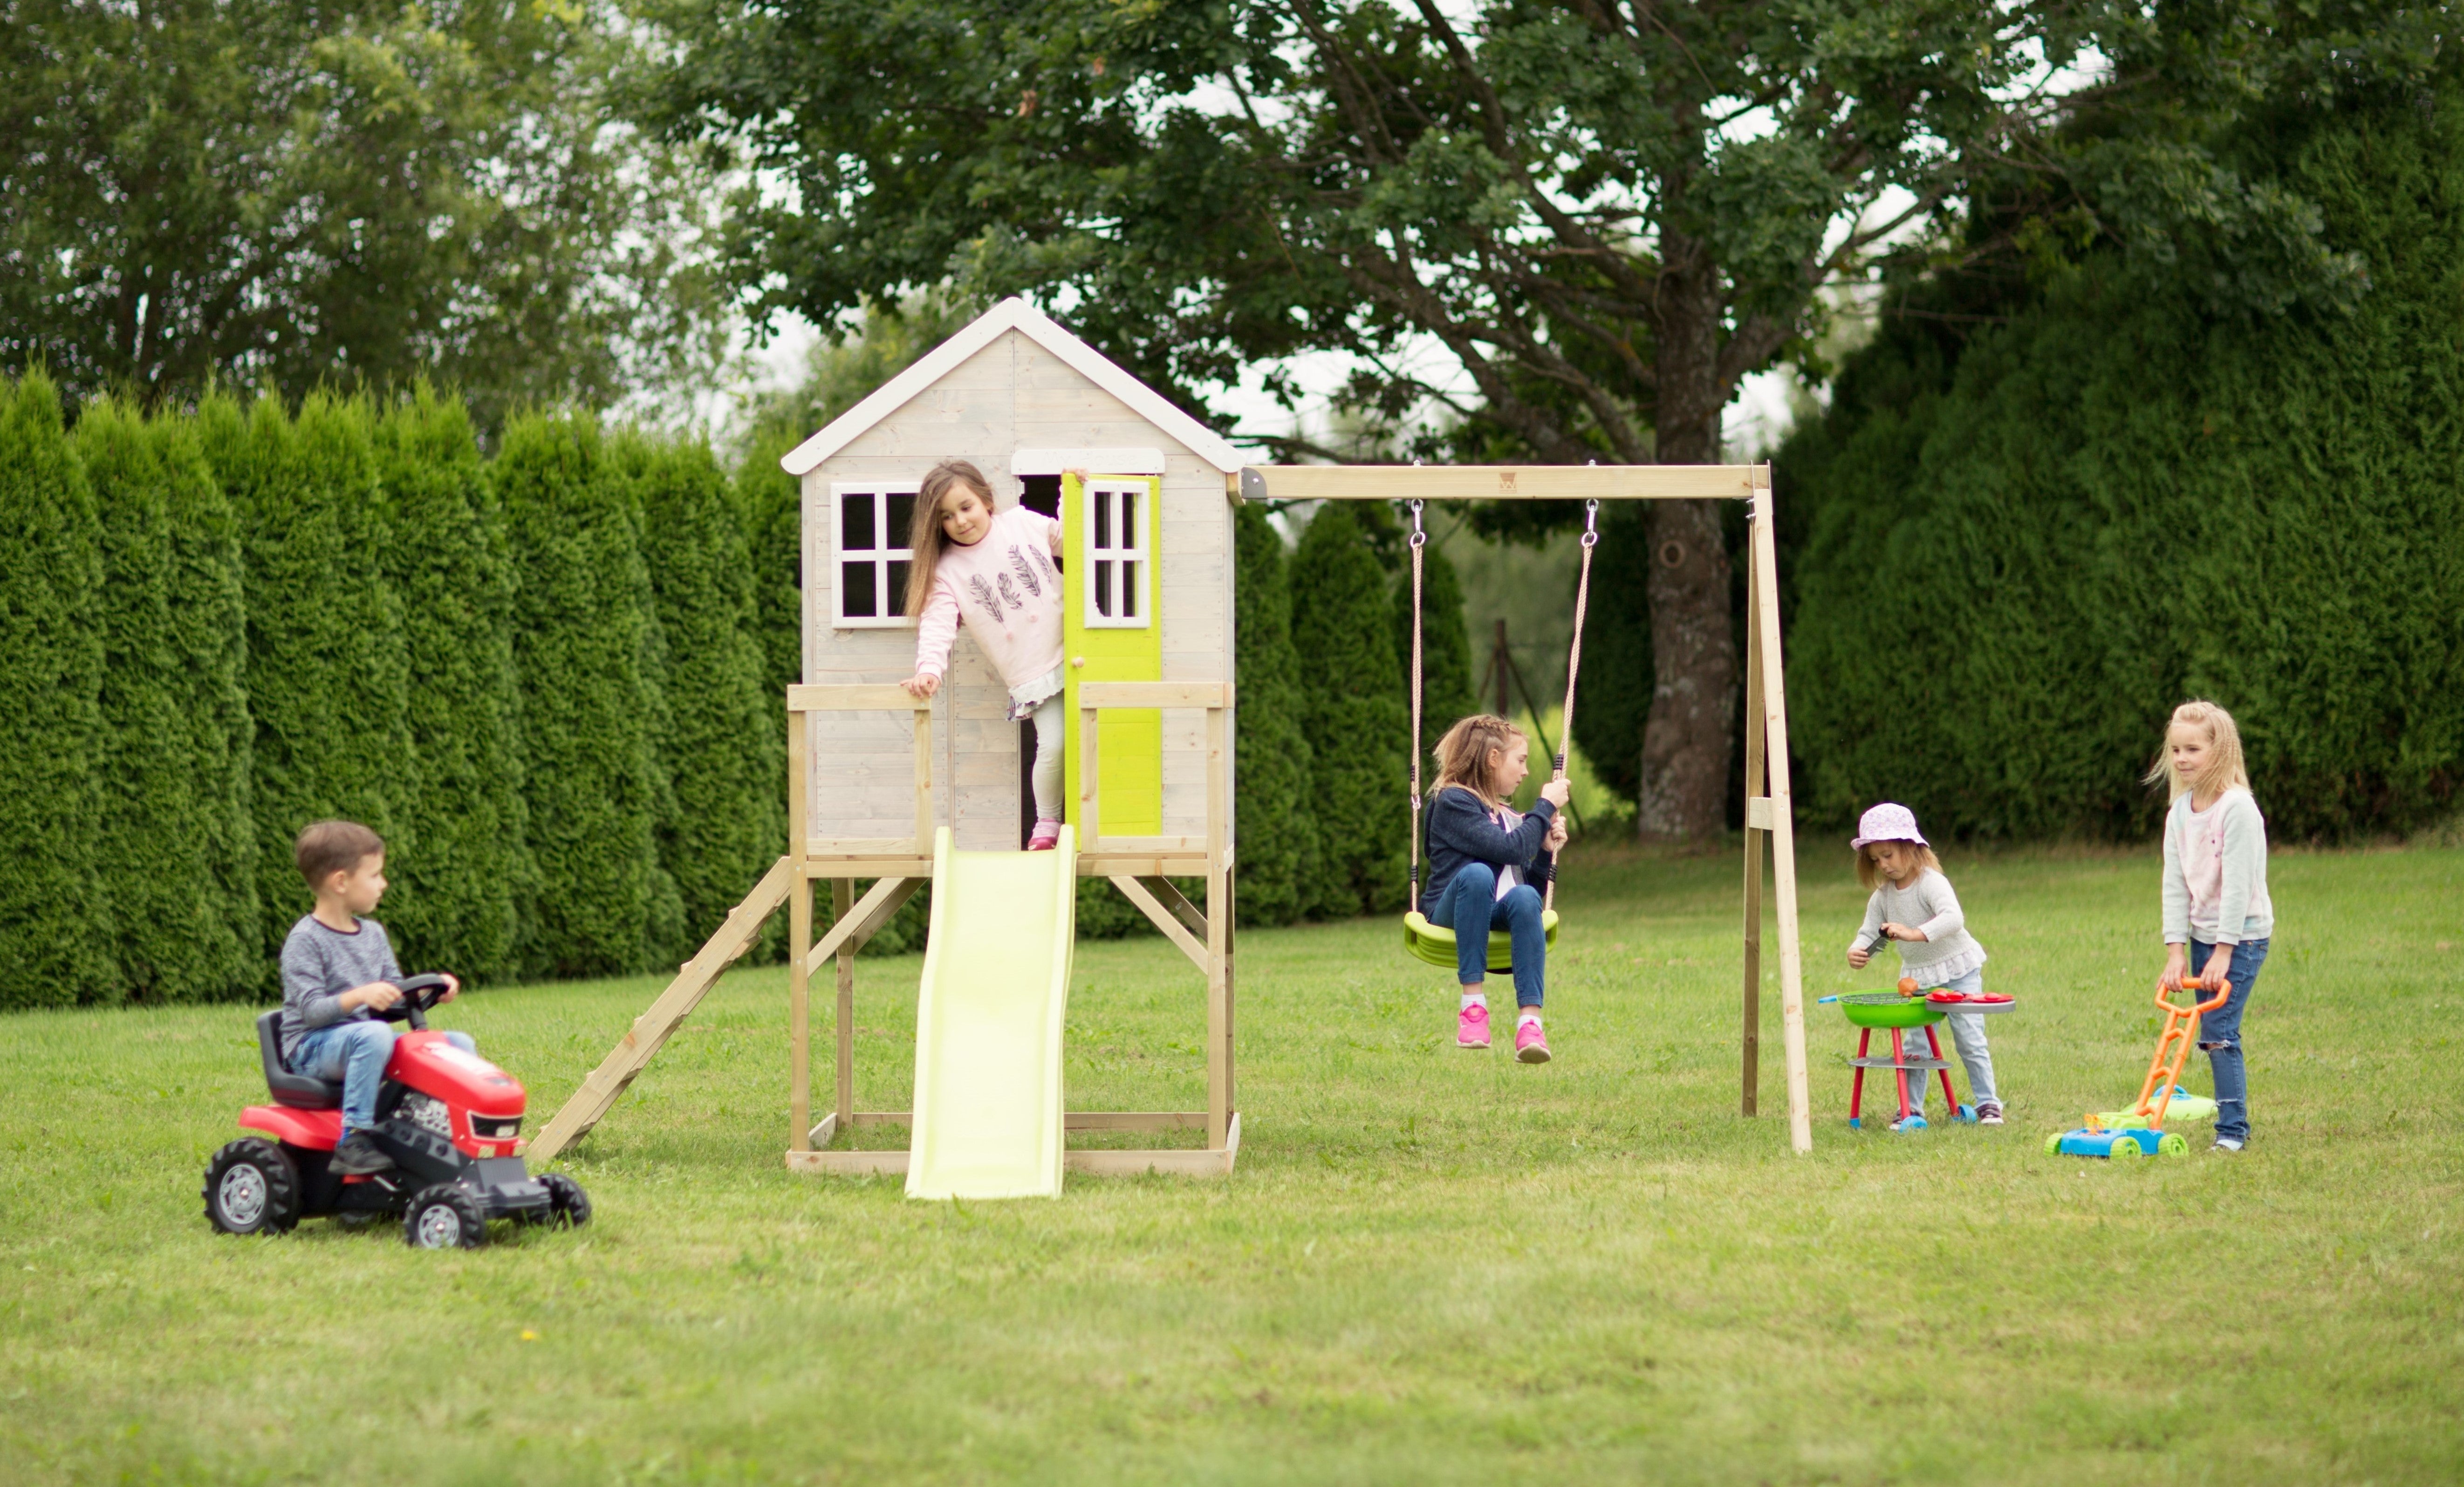 Stylish children's outdoor playhouses with swings, slides, and gym attachments for garden play and imagination